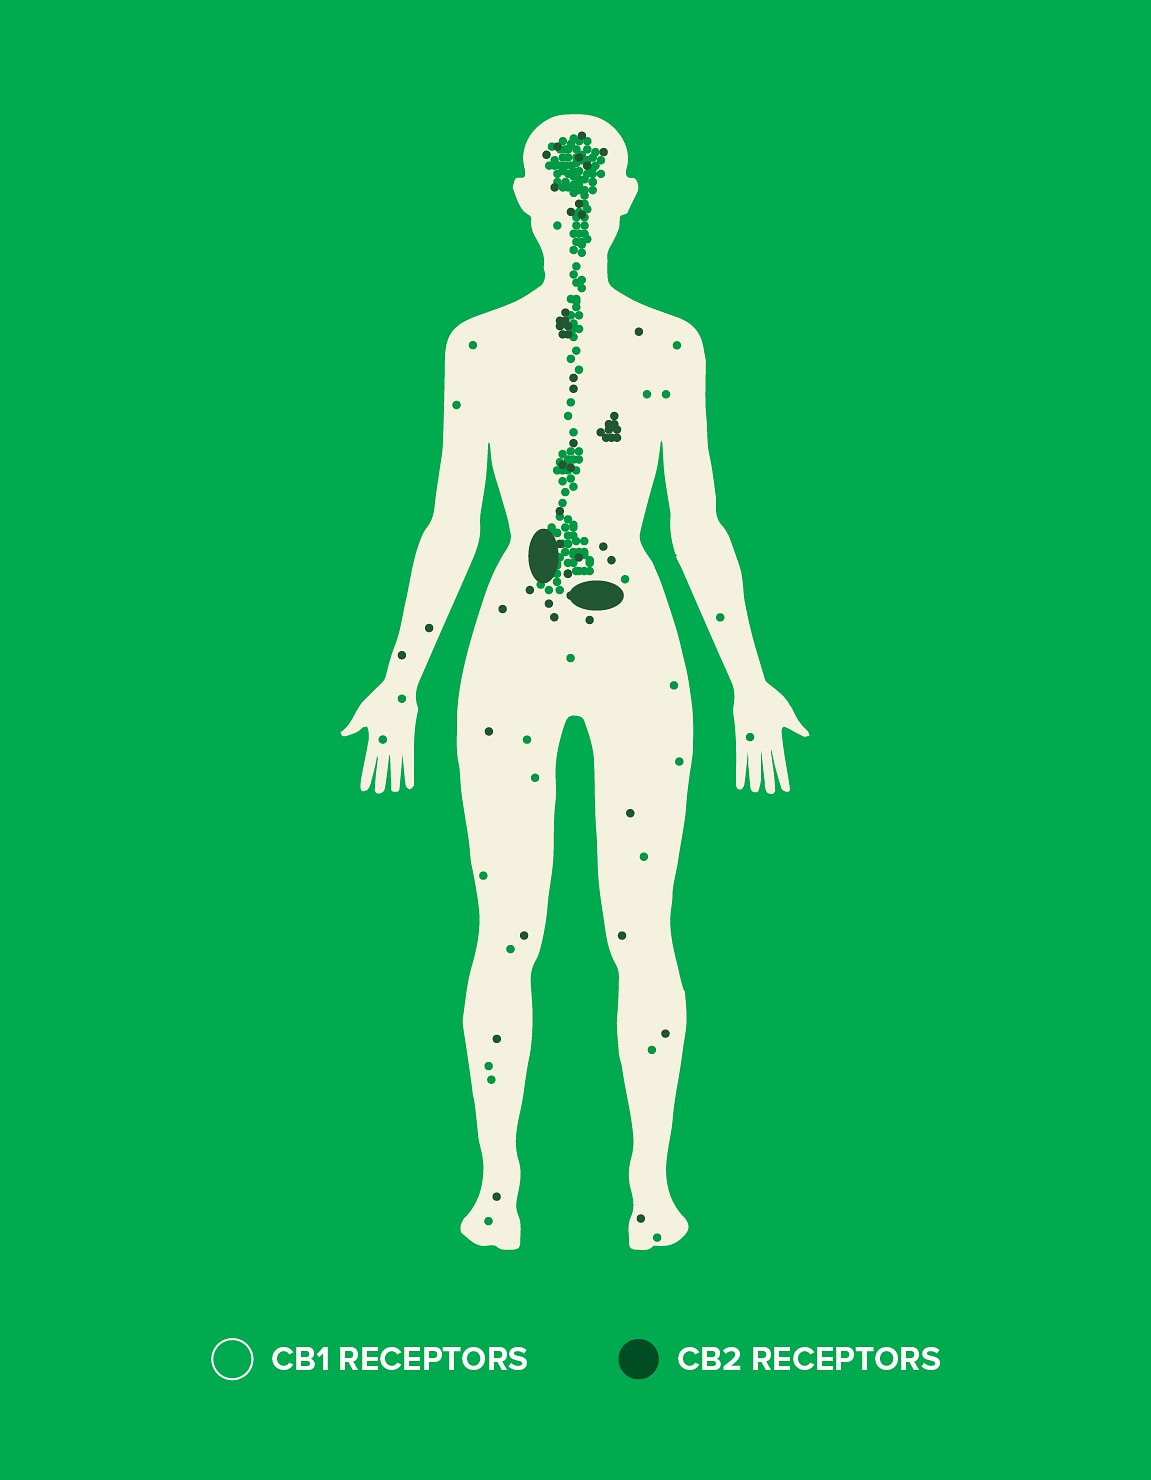 The Endocannaboid System and it receptors in the human body